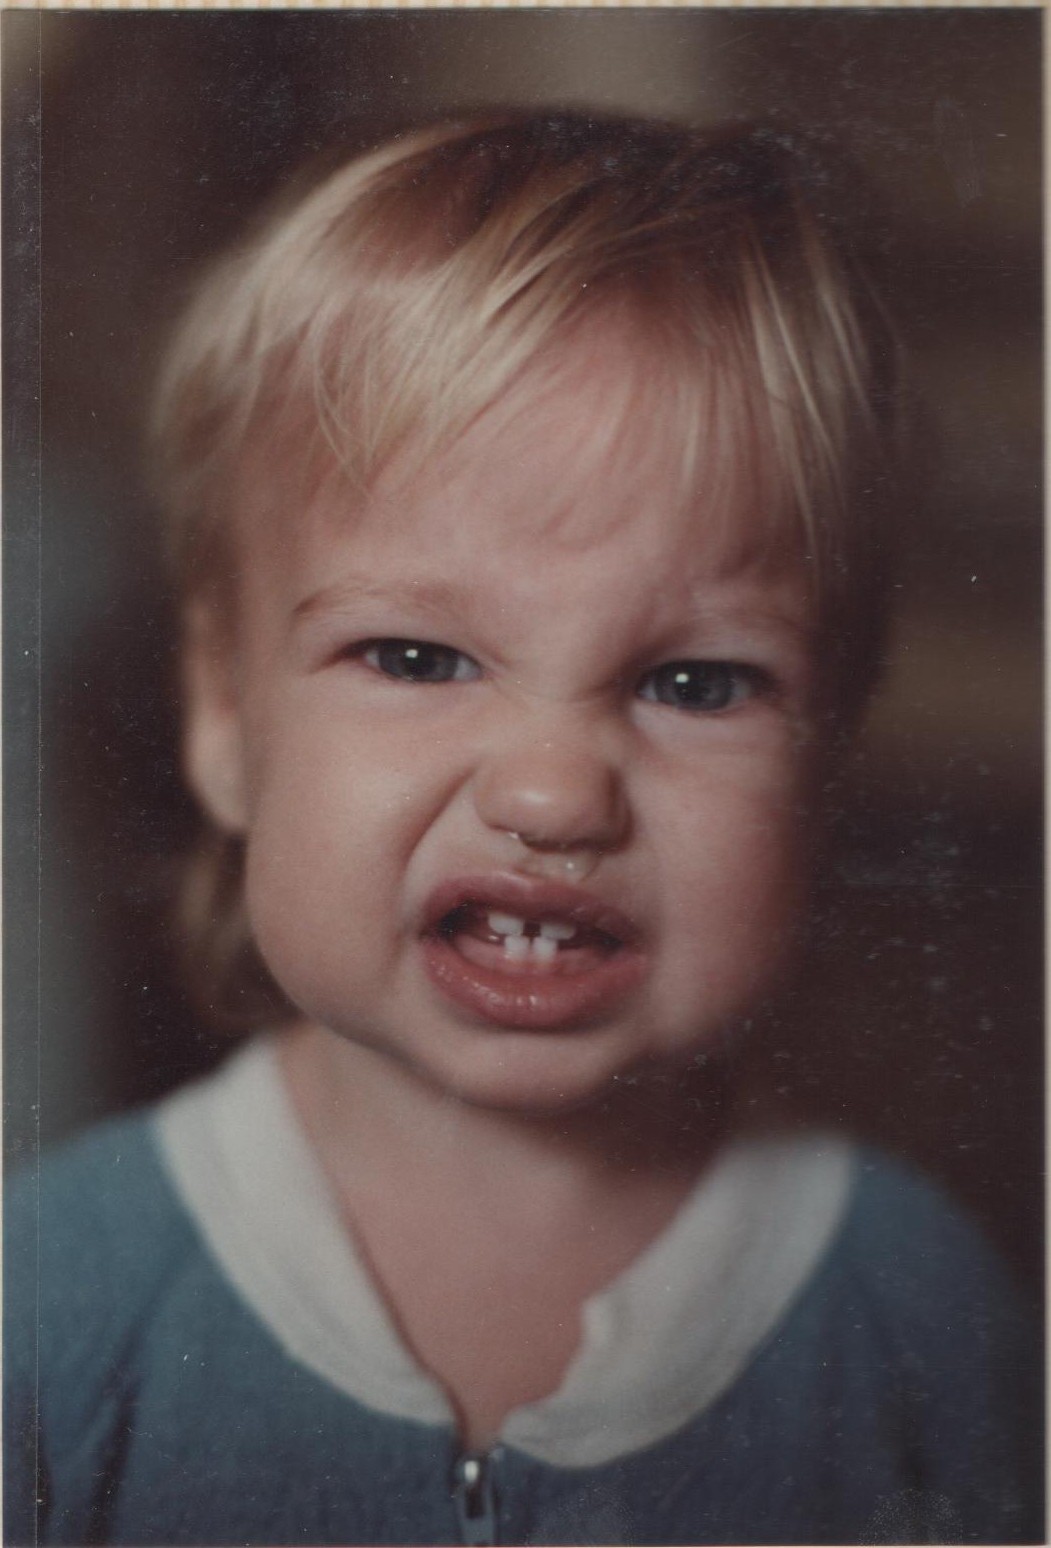 Brightergy IT Support Technician Jonathan Hockman at age 2.